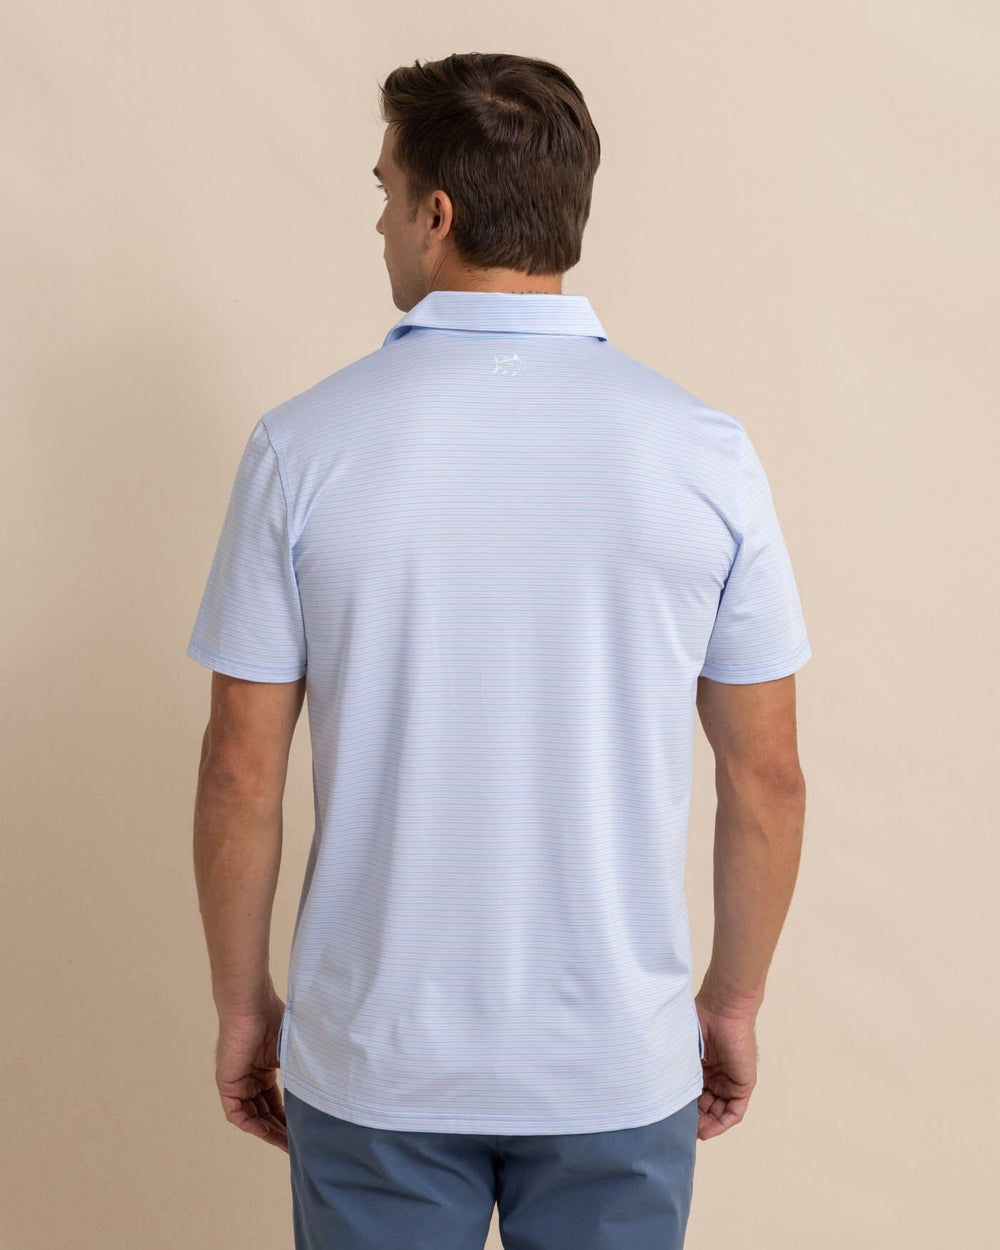 The back view of the Southern Tide Driver Verdae Stripe Polo by Southern Tide - Orchid Petal